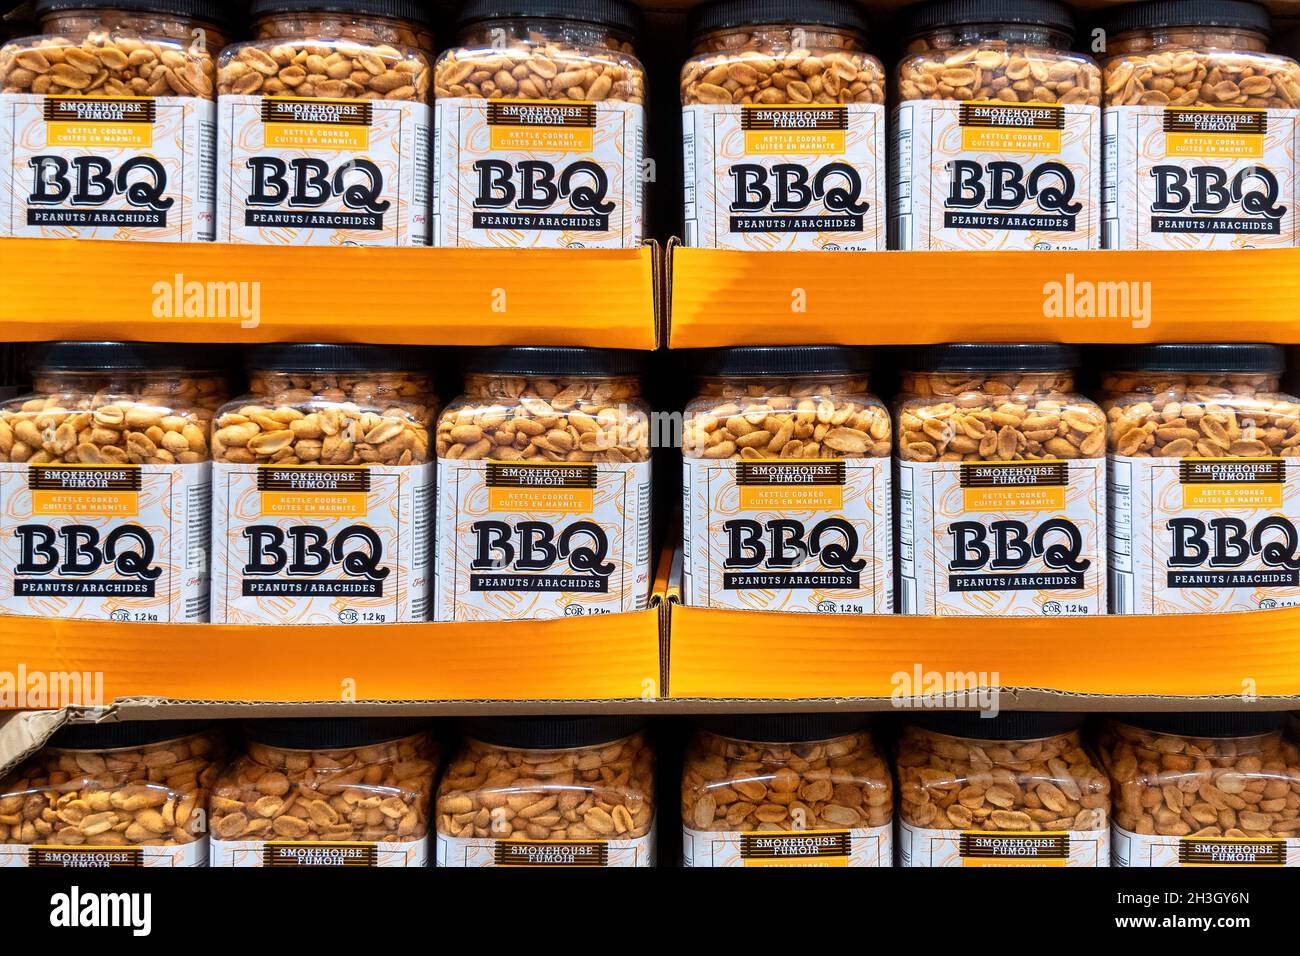 Toronto, Ontario, Canada-October 20, 2019: BBQ peanuts bottles on display in a retail store. The product has a good demand in most Canadian stores. Stock Photo